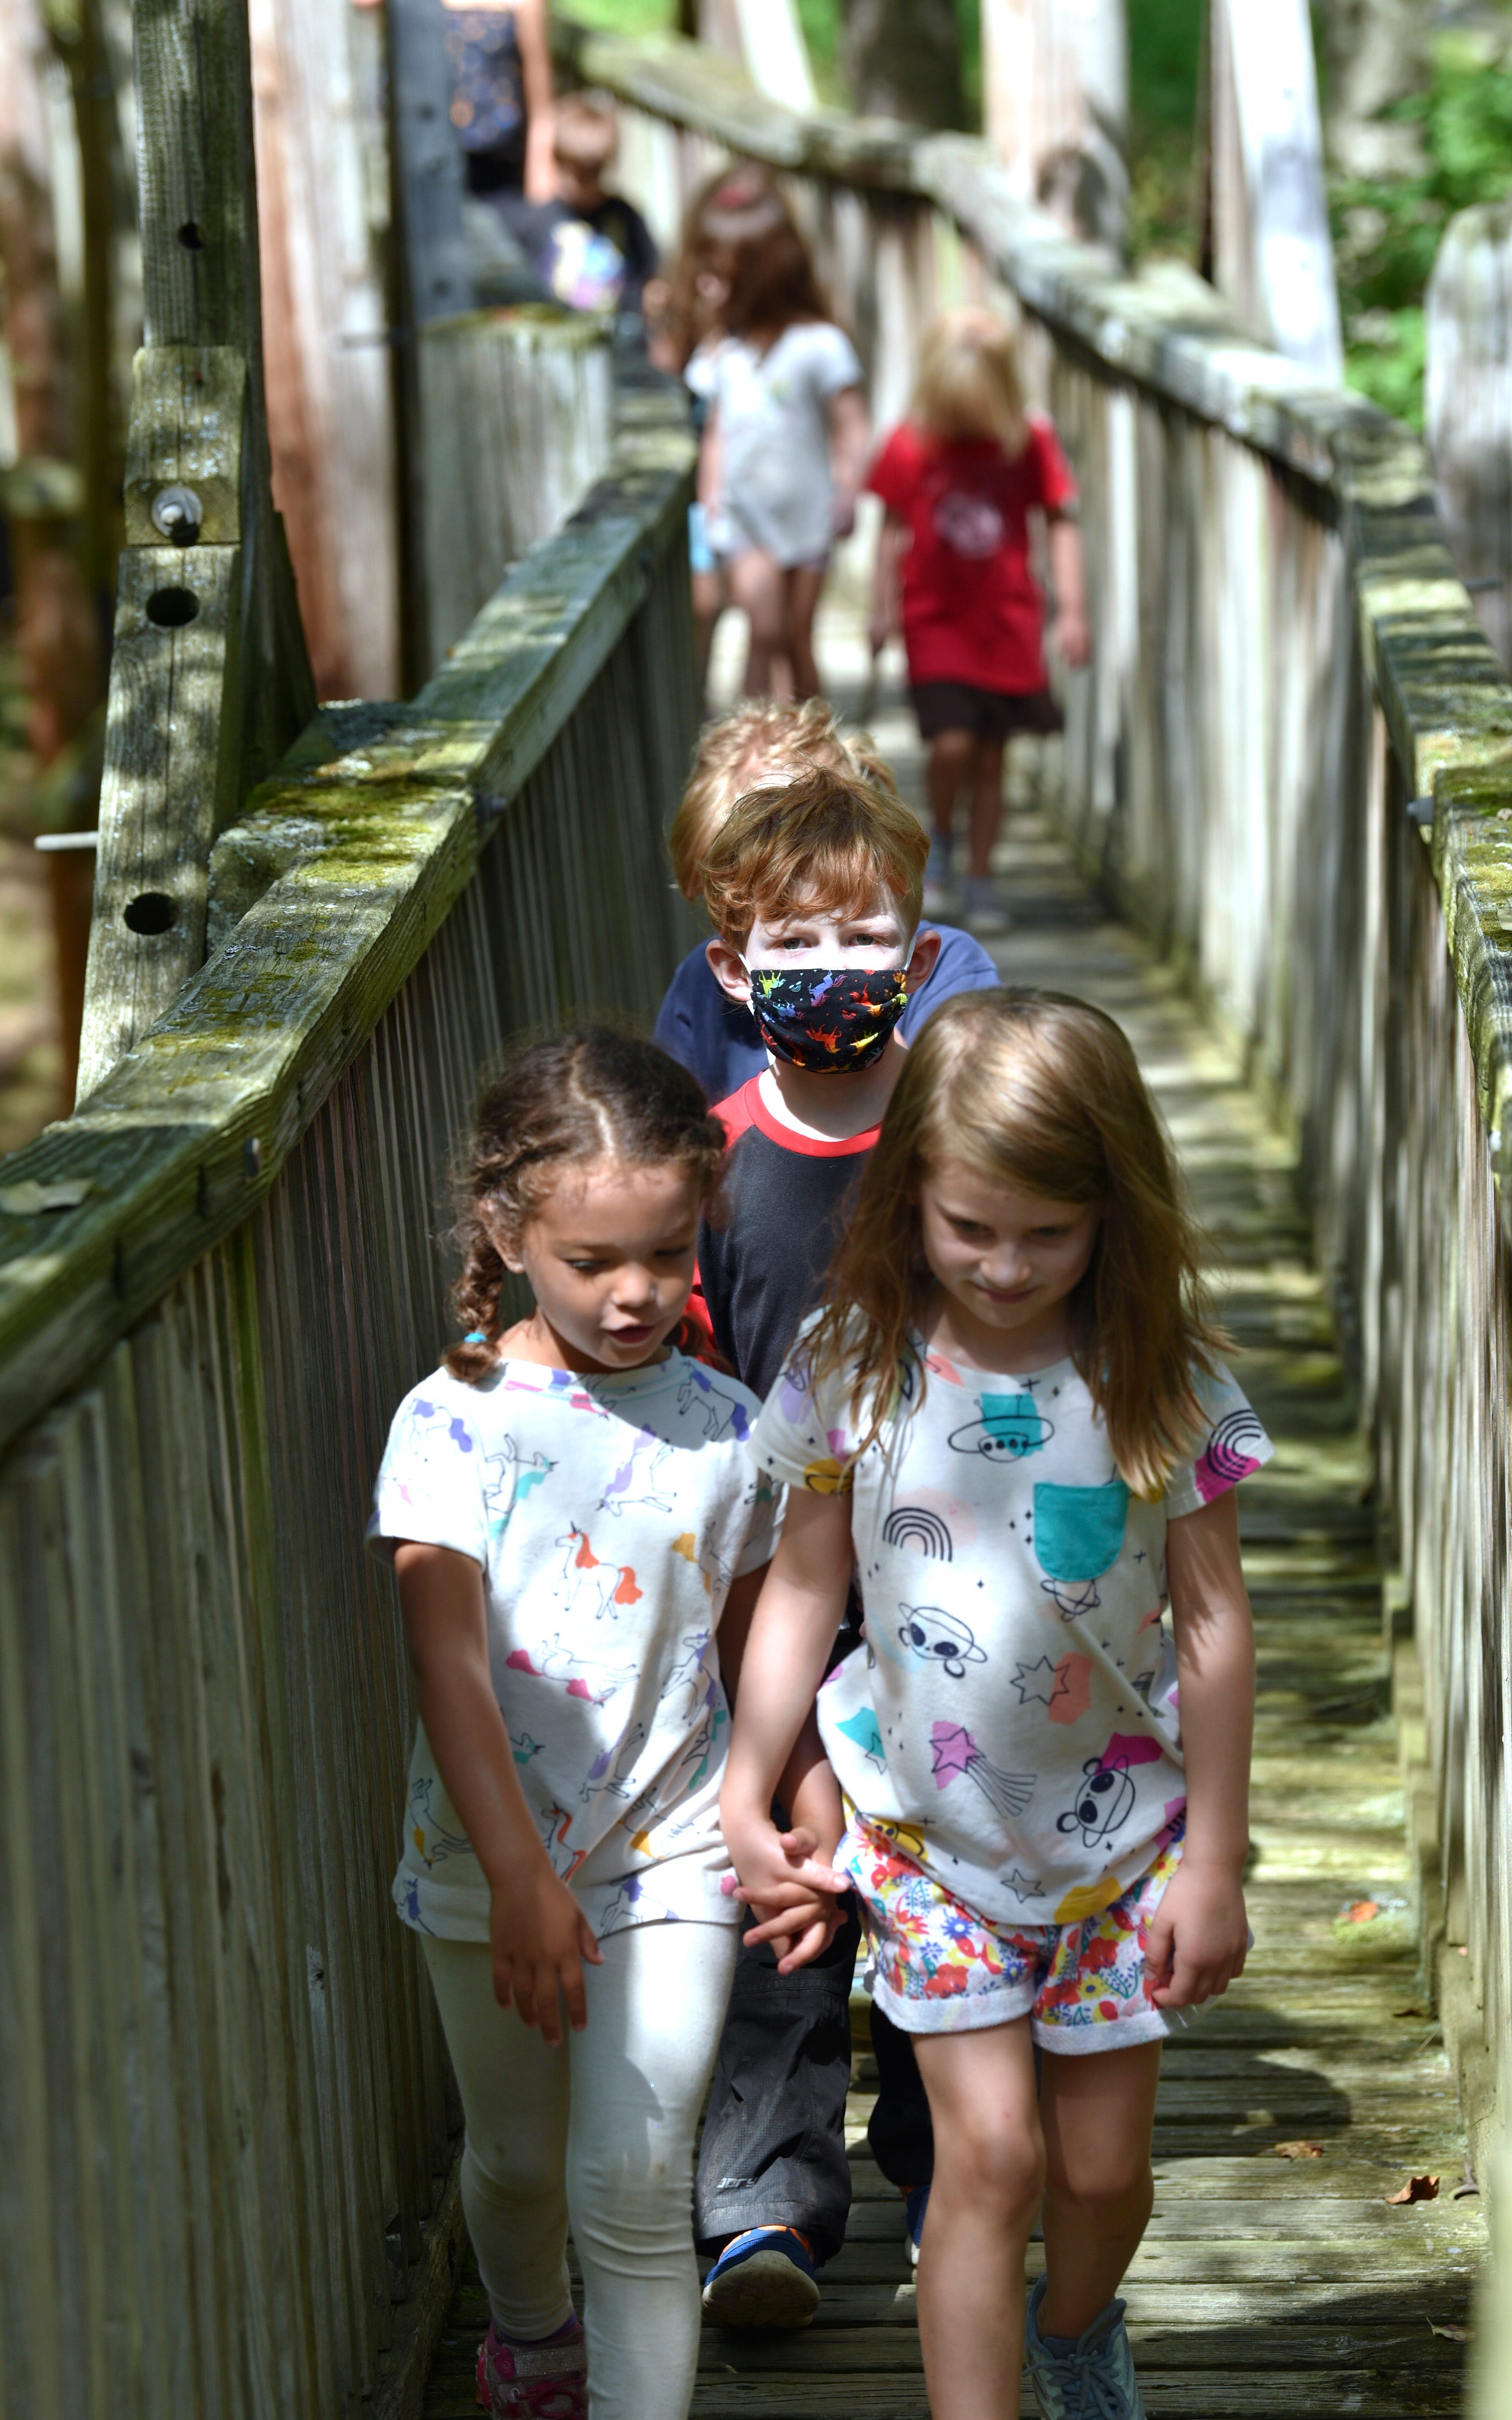 Six-year-old students cross The Bridge en route to Prince Lake for the afternoon. The Bridge was built almost 20 years ago by students at the school.